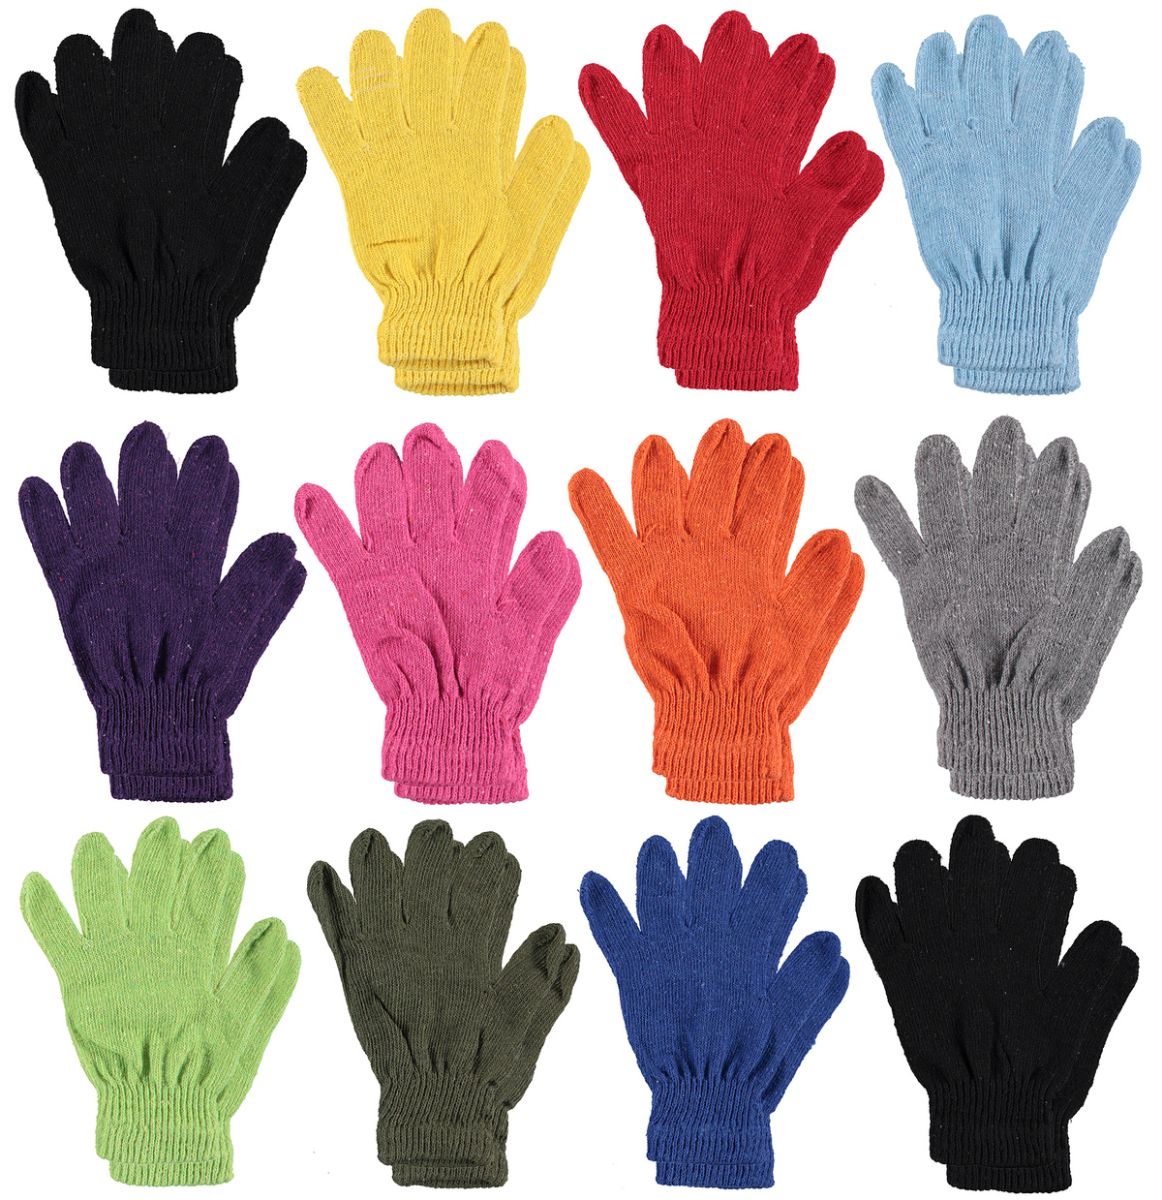 48 Wholesale Yacht & Smith Women's Warm And Stretchy Winter Magic Gloves Bulk Pack Bright Colors